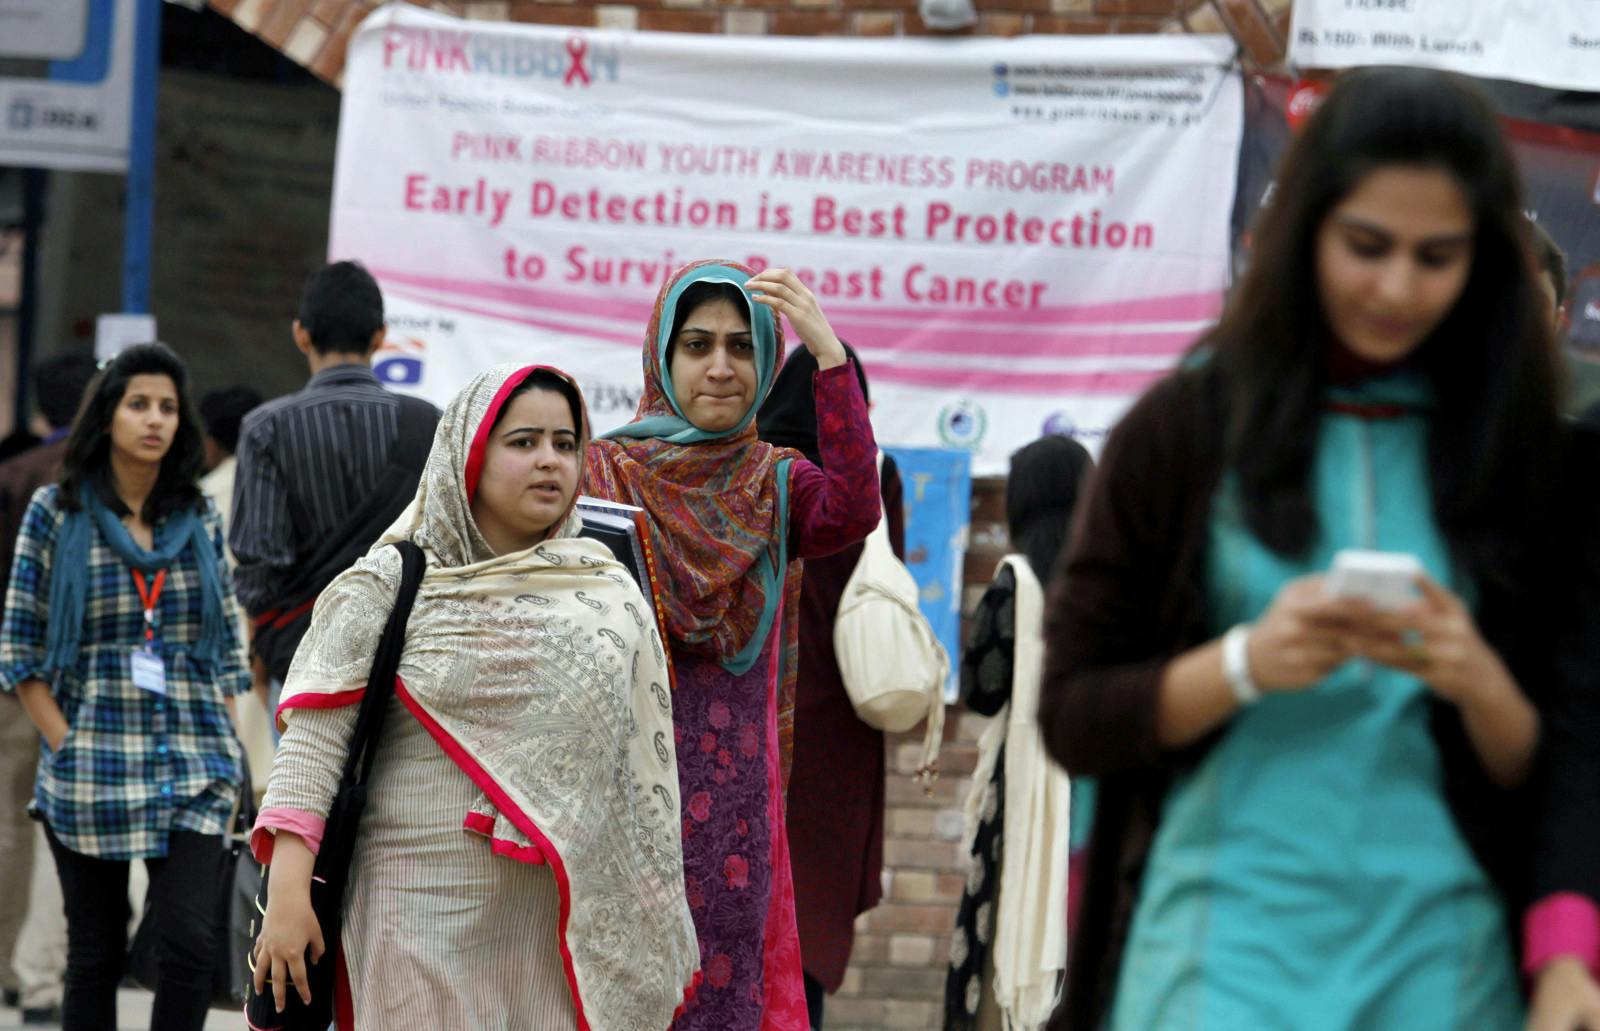 Students walk past a banner promoting awareness on breast cancer at a university in Islamabad, Pakistan. (AP Photo/Anjum Naveed)